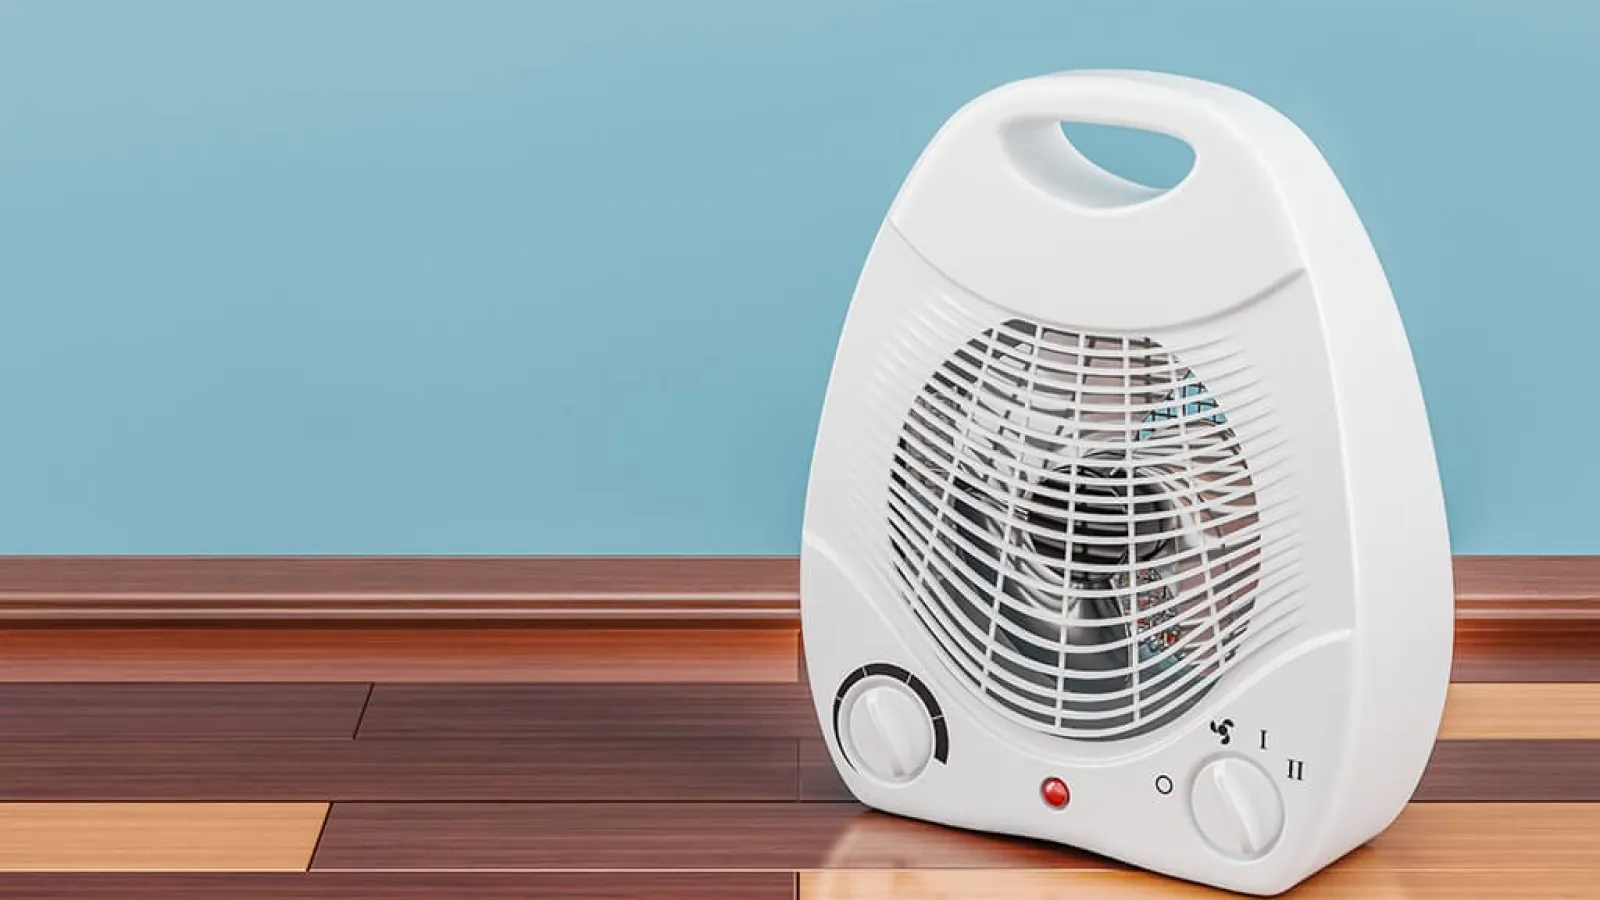 How to Use Space Heaters Safely